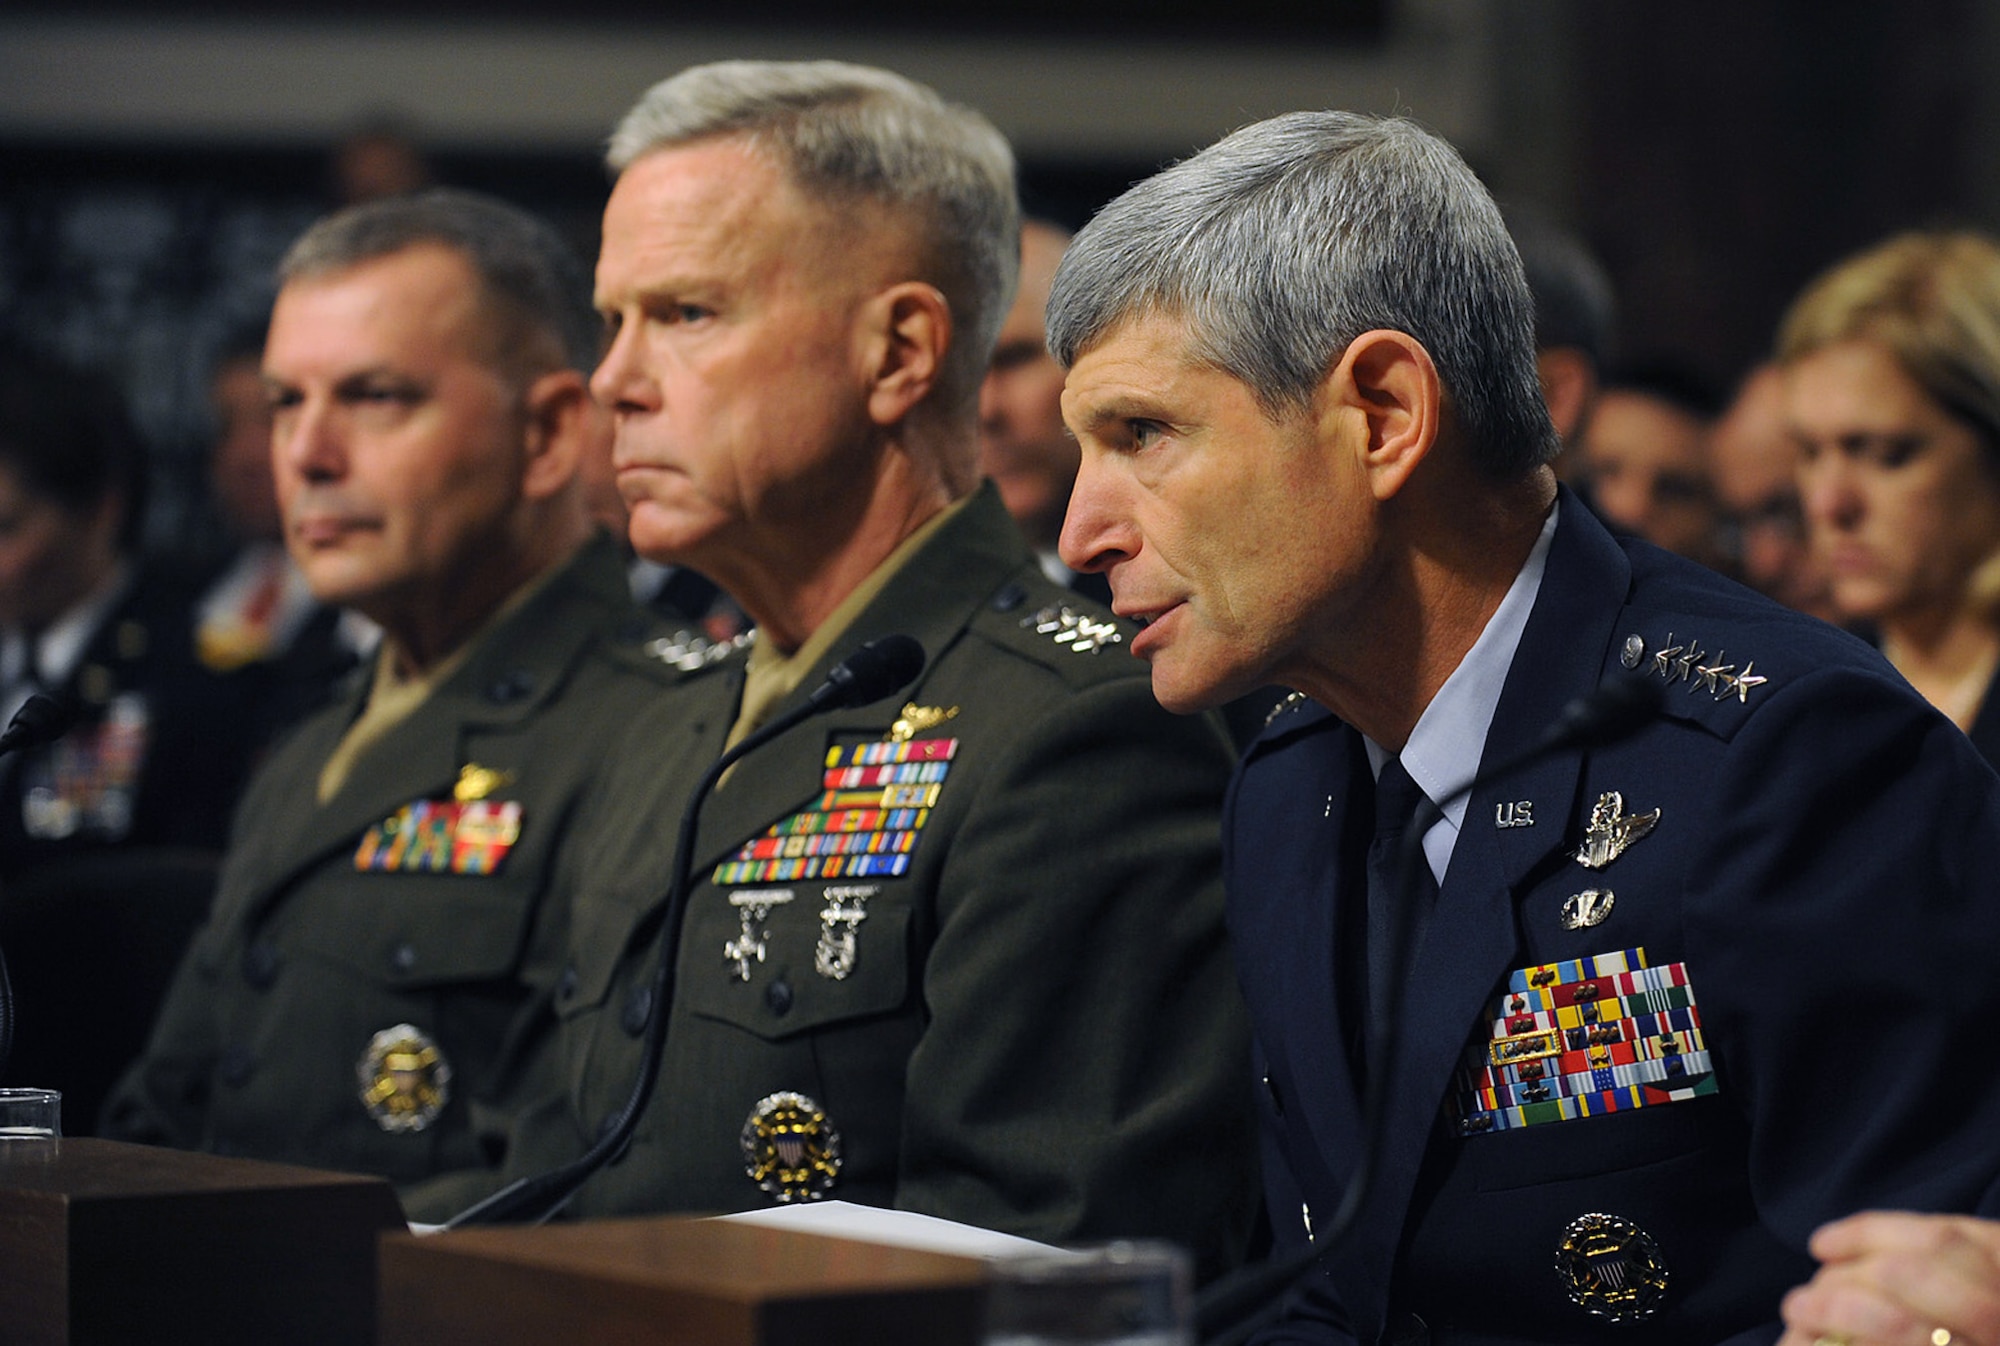 Air Force Chief of Staff Gen. Norton Schwartz testifies before the Senate Armed Services Committee Dec. 3, 2010, in Washington, D.C. General Schwartz, his fellow service chiefs and the vice chairman of the Joint Chiefs of Staff testified on the recently released Comprehensive Review Working Group report, which addresses the potential repeal of the "Don't Ask, Don't Tell" law. (U.S. Air Force photo/Scott M. Ash)